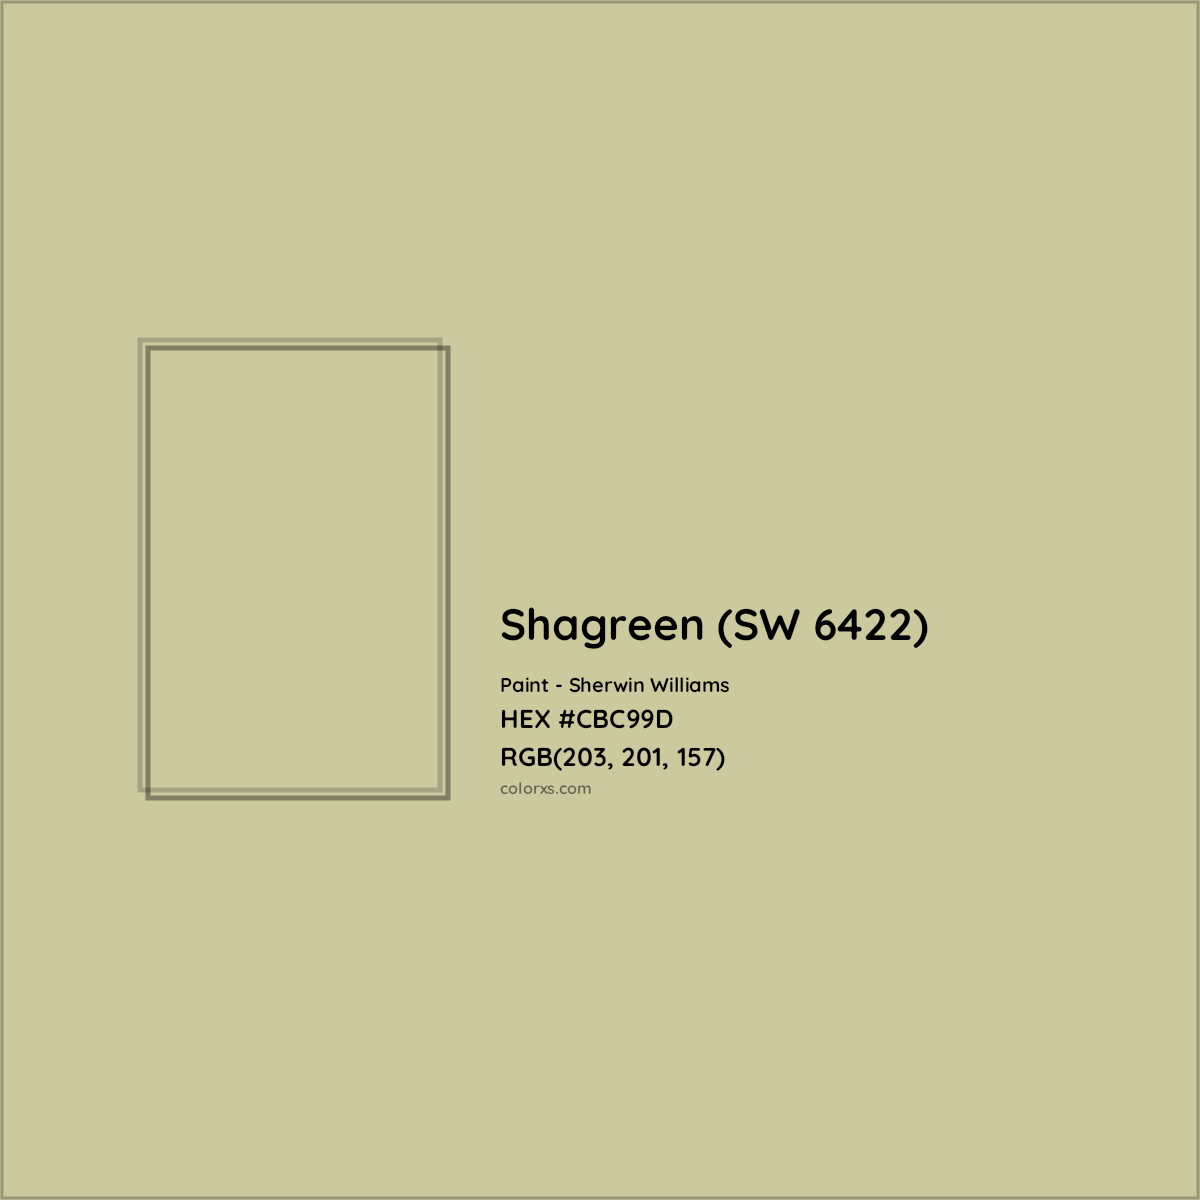 HEX #CBC99D Shagreen (SW 6422) Paint Sherwin Williams - Color Code